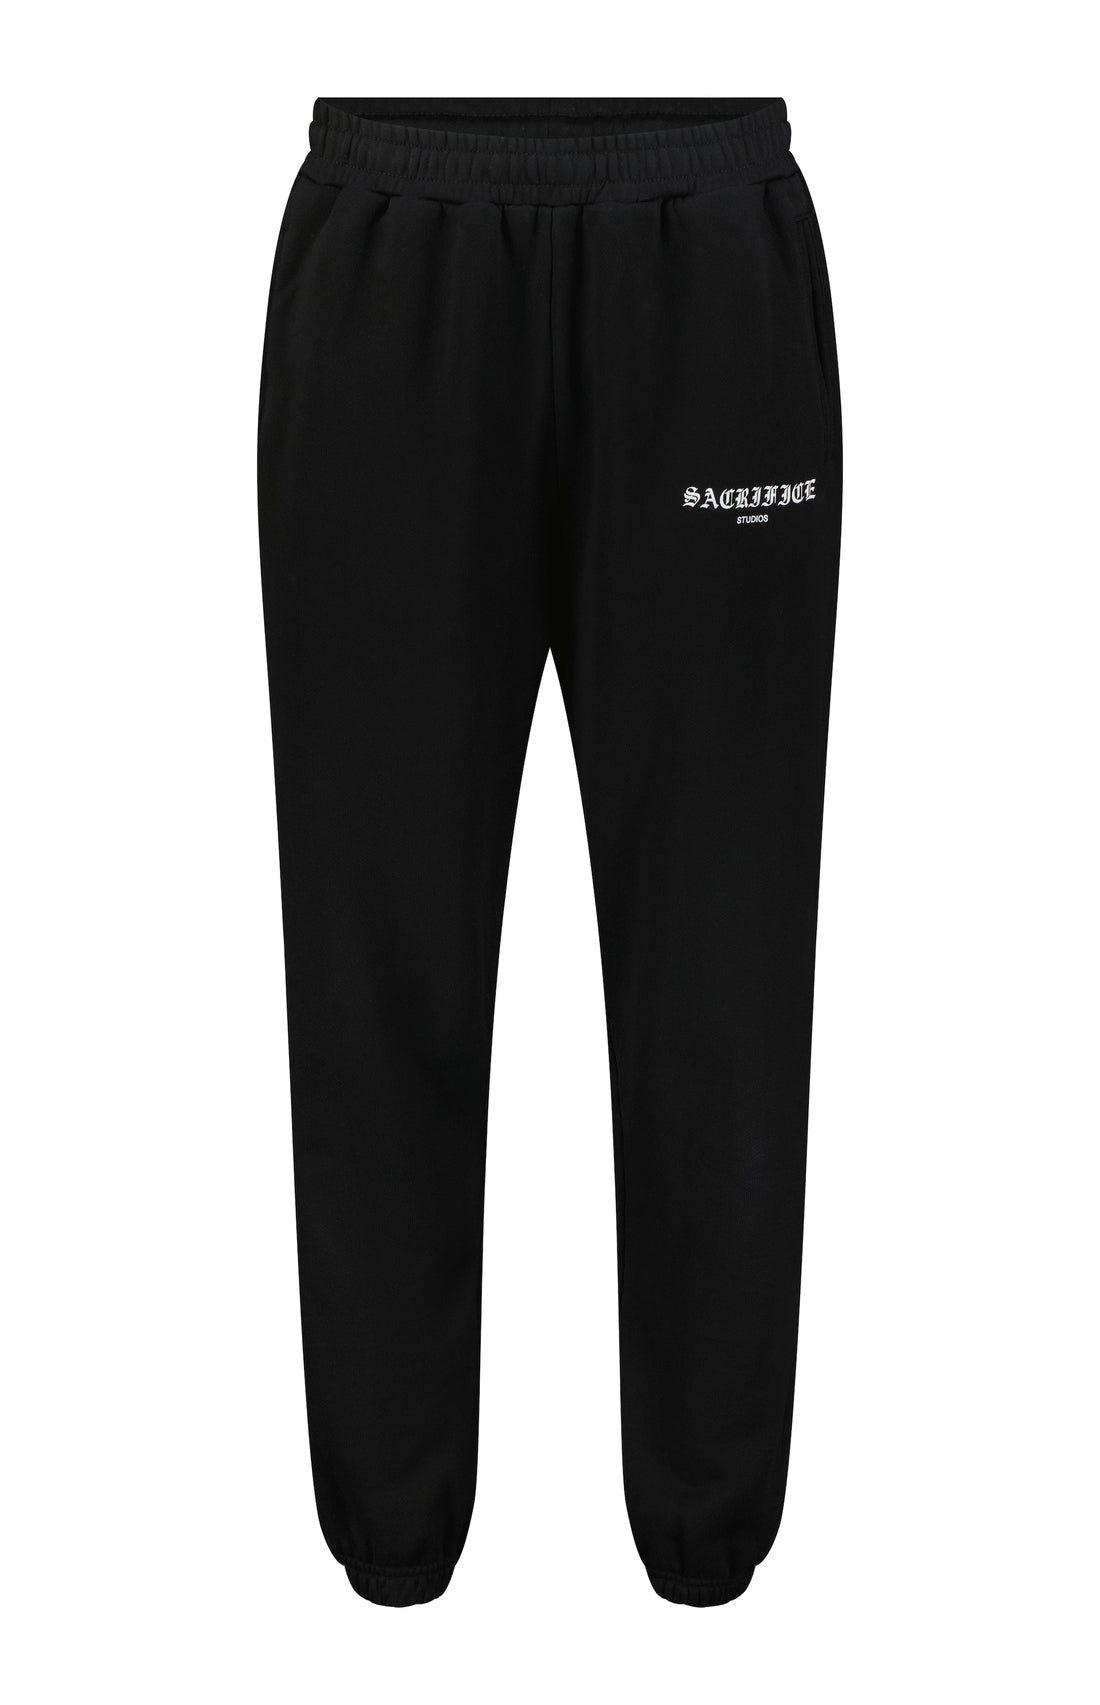 Upgrade your lounge-wear with our Premium Sweatpants. Made from heavy-weight, soft, and comfortable 100% luxury-weight 450GSM fabric, expertly crafted in Portugal with attention to detail. Machine wash cold, hang to dry for best results. Choose your normal size for an oversized fit or size down for a regular fit. A unique and high-end addition to your wardrobe.